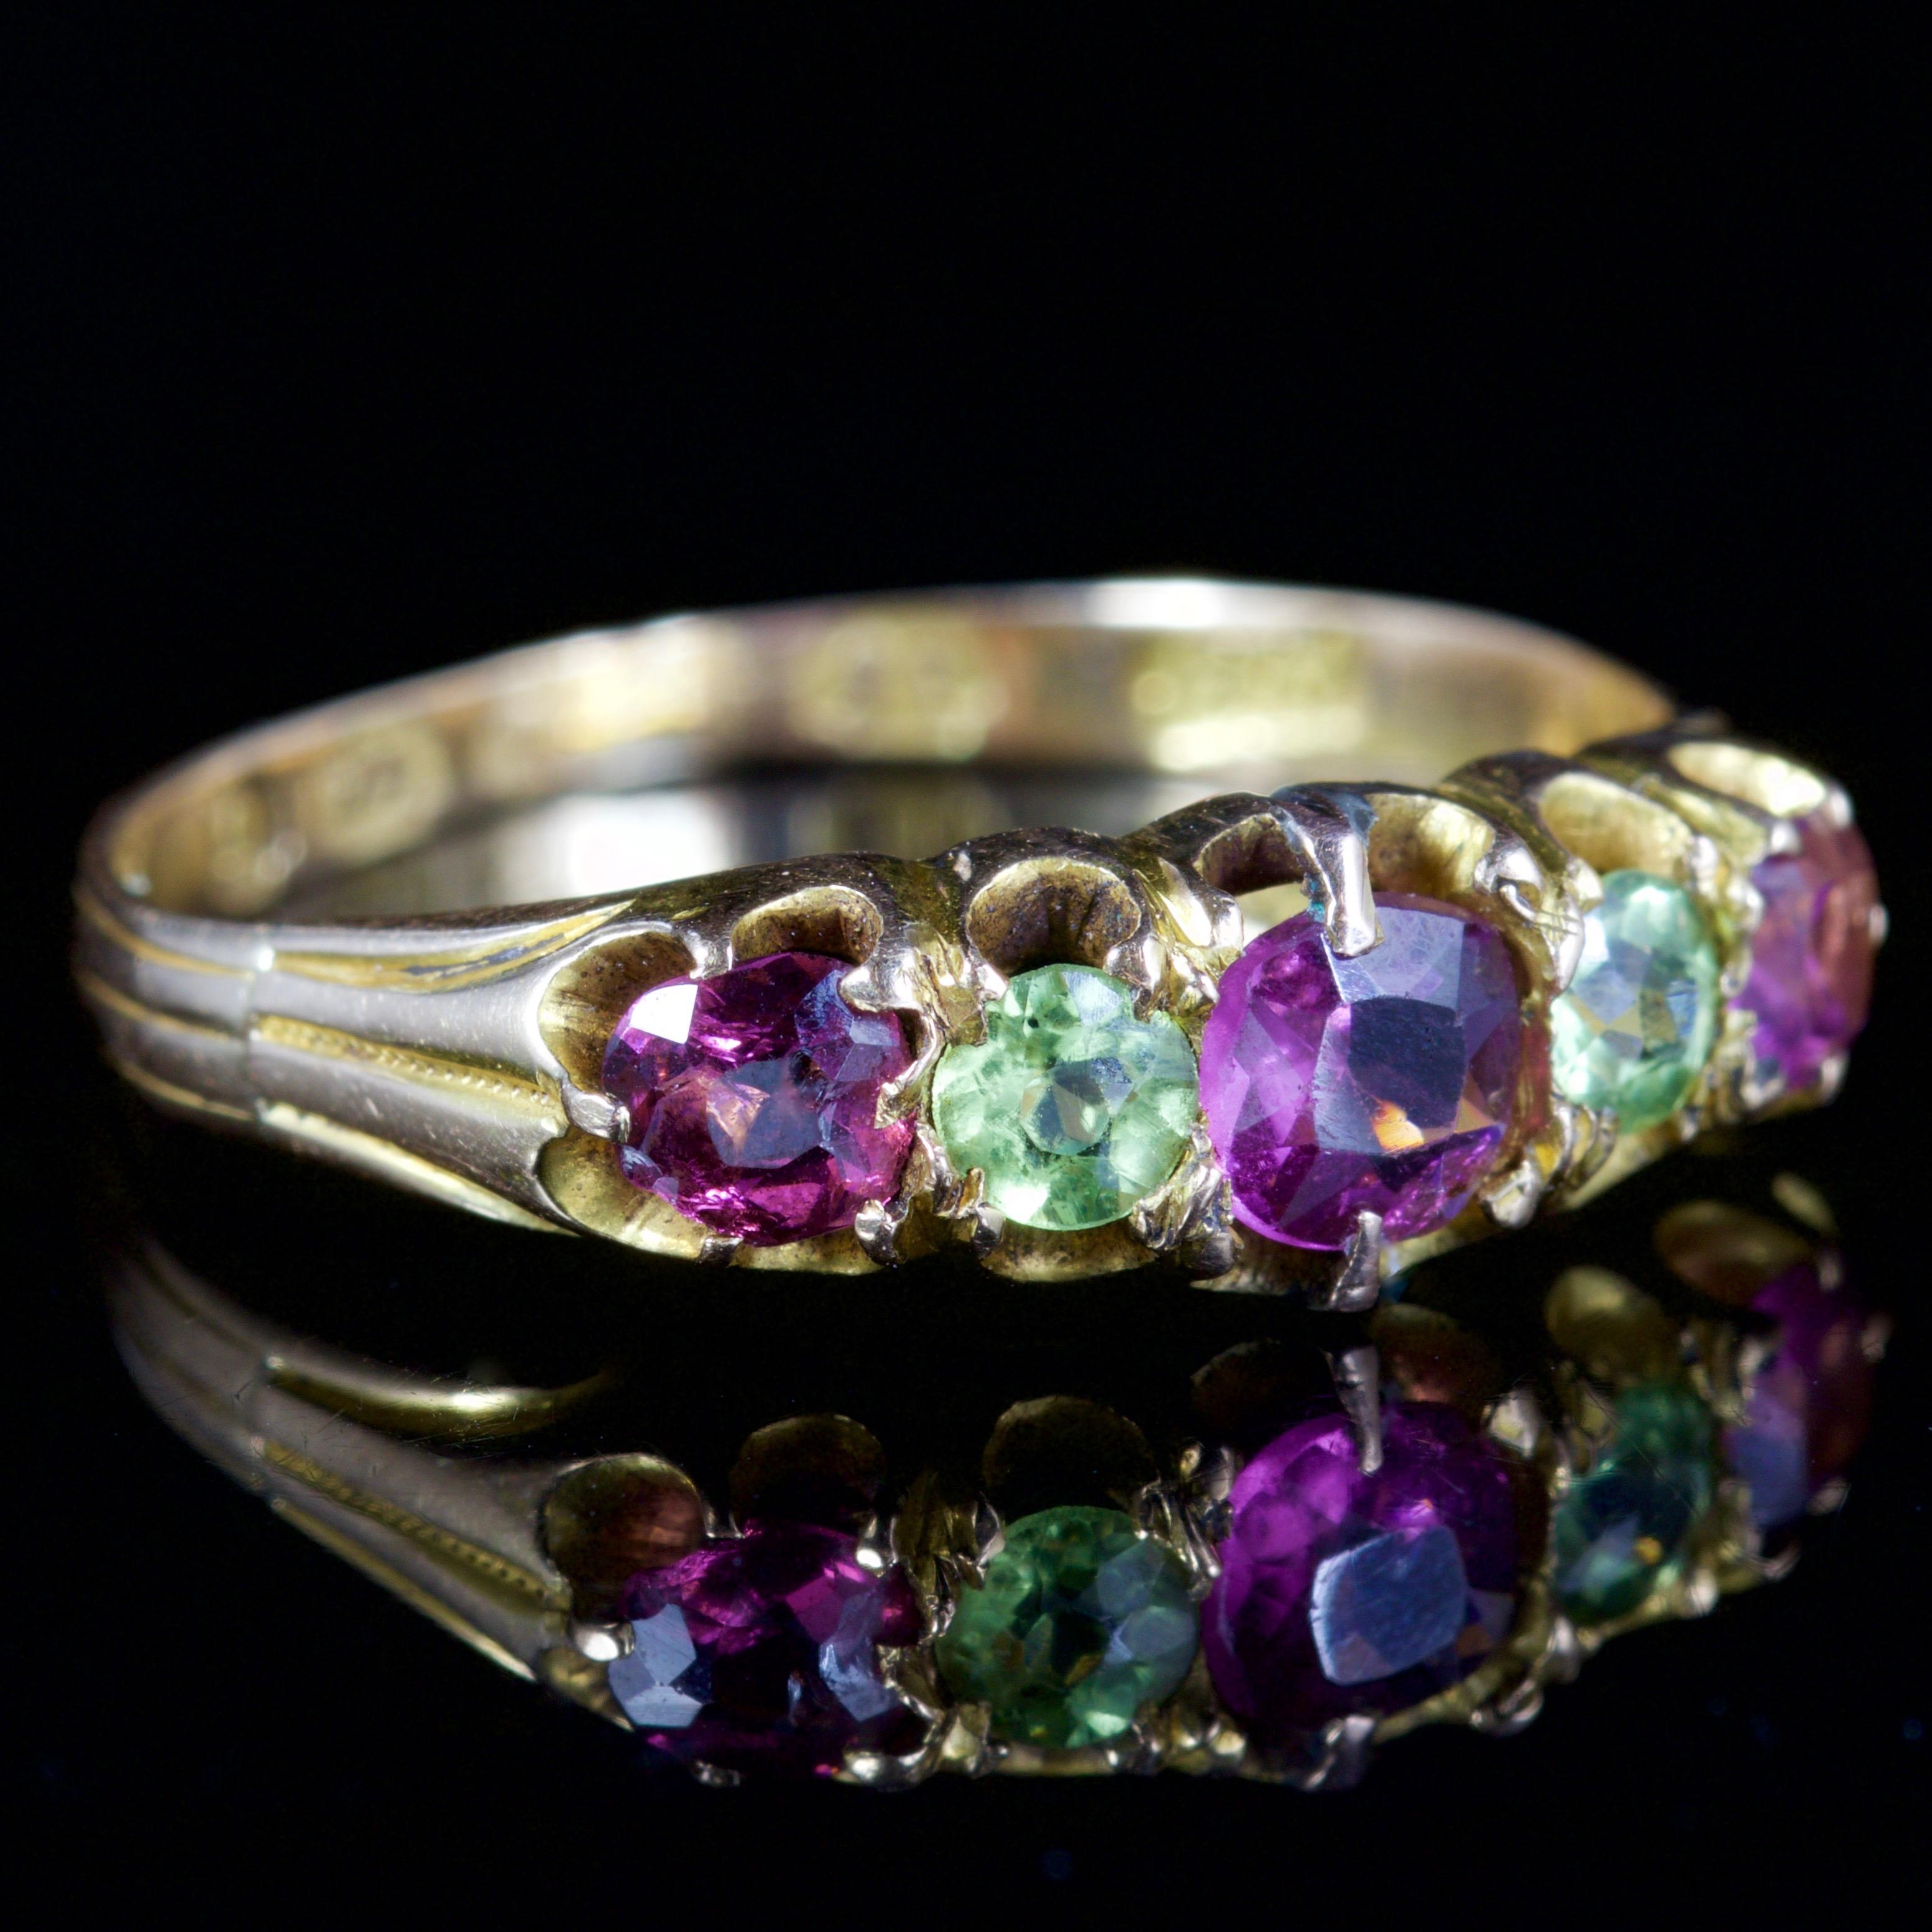 Women's Antique Victorian Suffragette Amethyst Peridot Ring 15 Carat Gold, circa 1900 For Sale